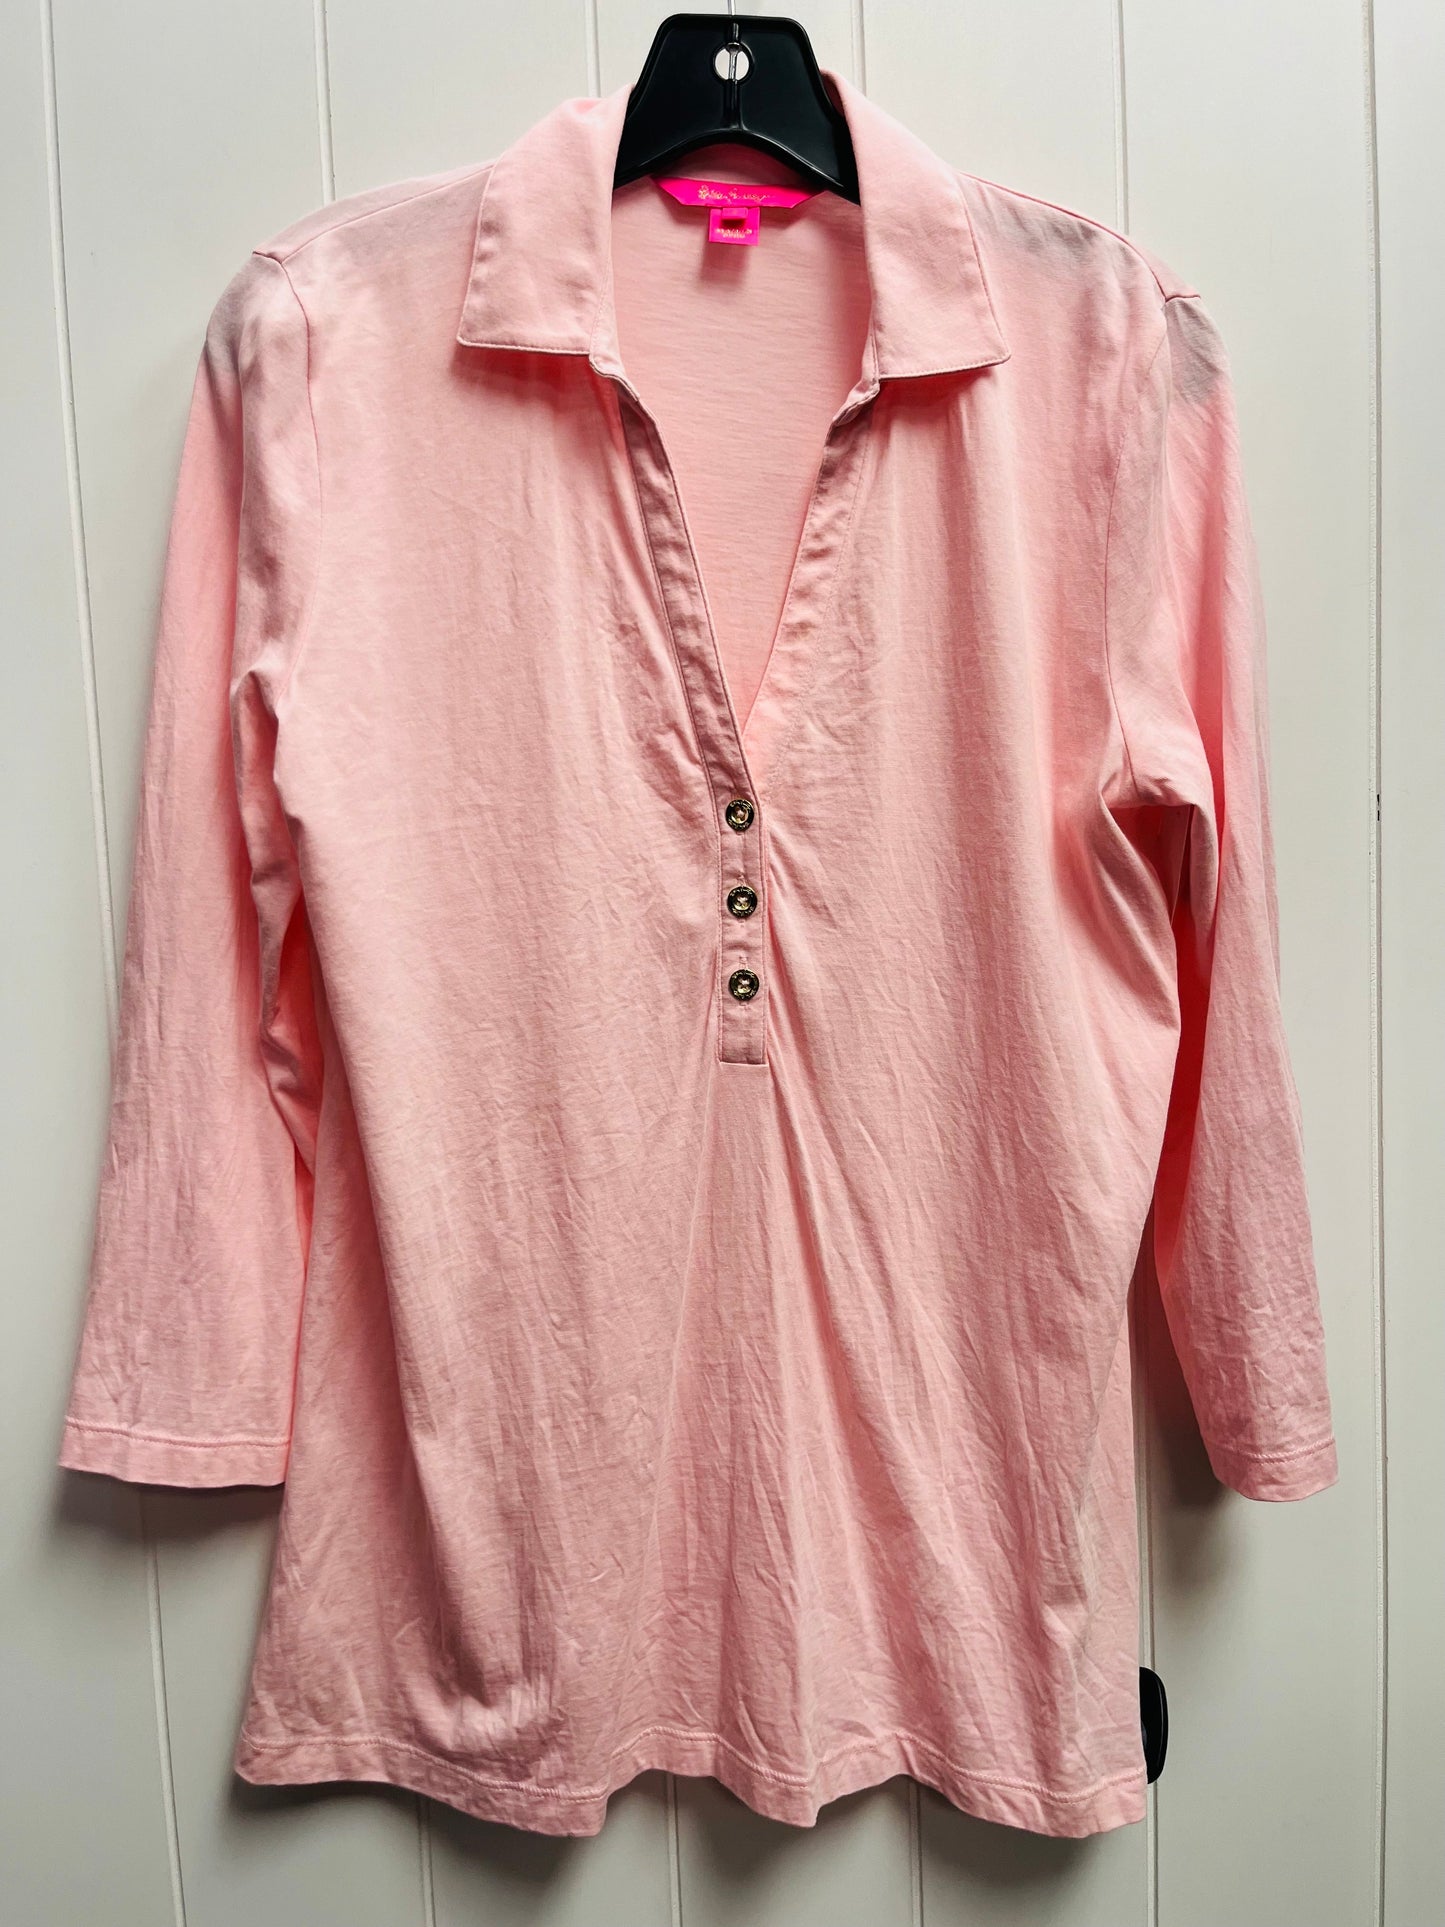 Pink Top Long Sleeve Lilly Pulitzer, Size S